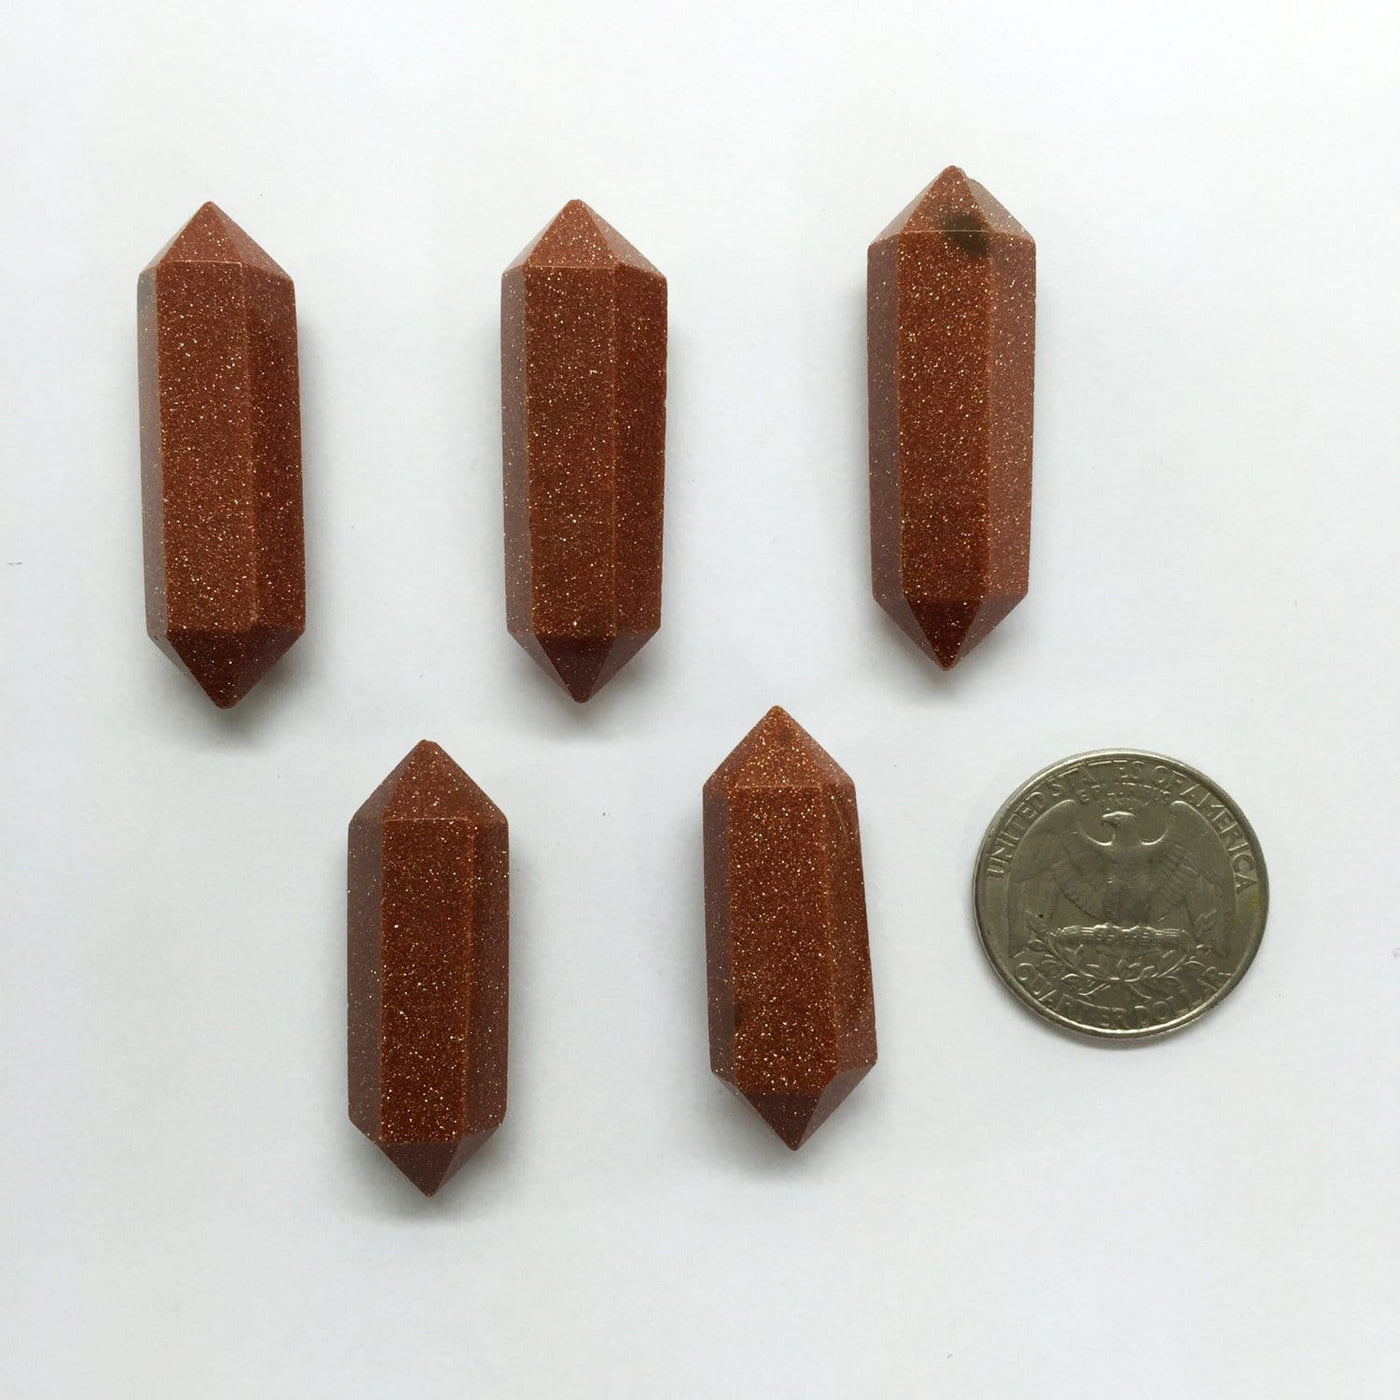 5 Goldstone Double Terminated Points on a white background with a quarter next to it as a size comparison